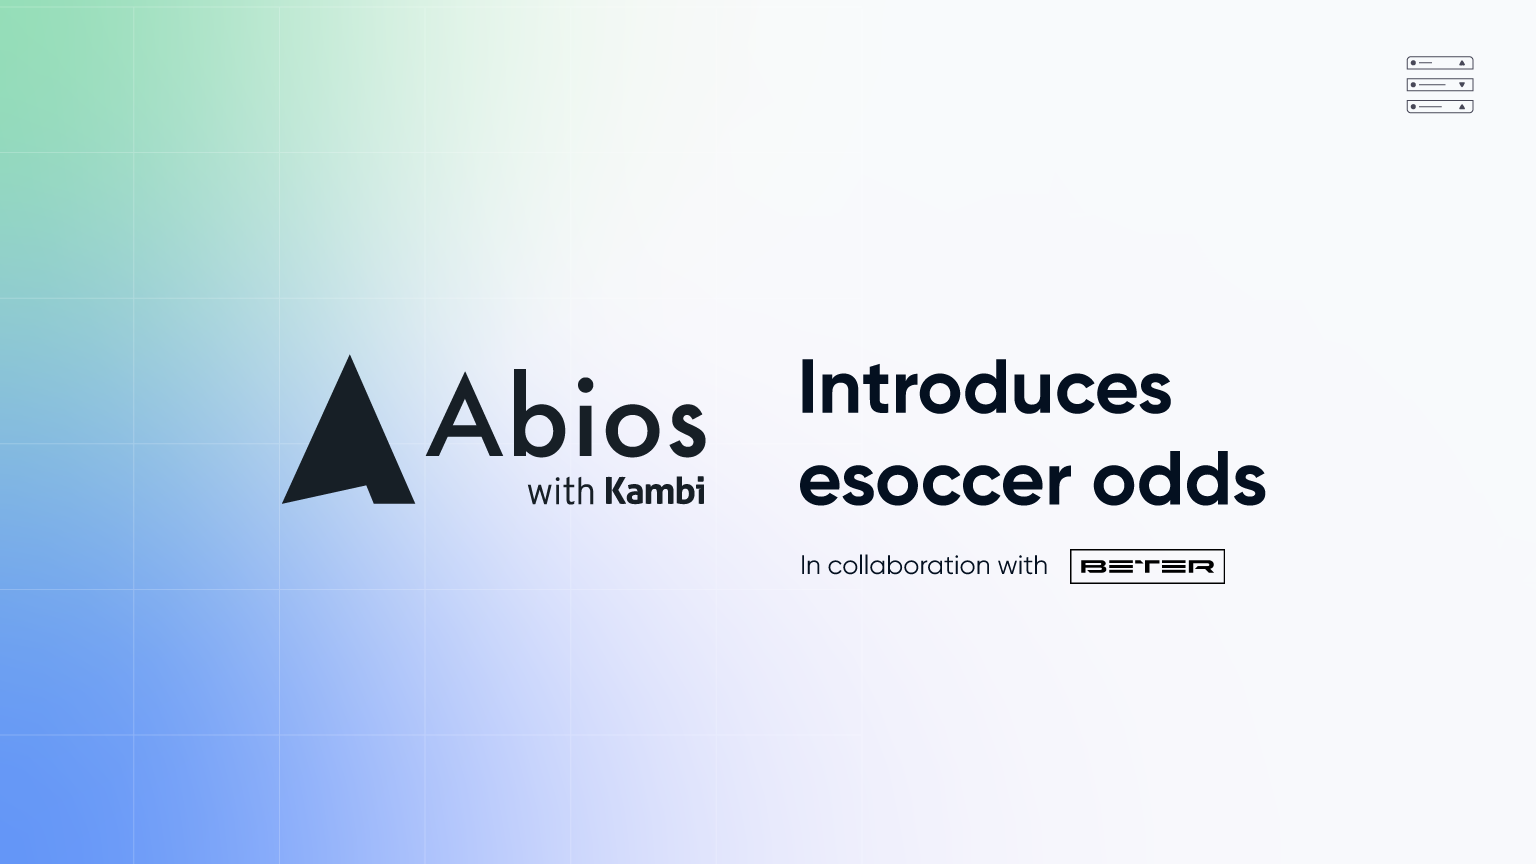 Abios fills the holes in the seasonal sports calendar  with engaging esoccer, provided by BETER